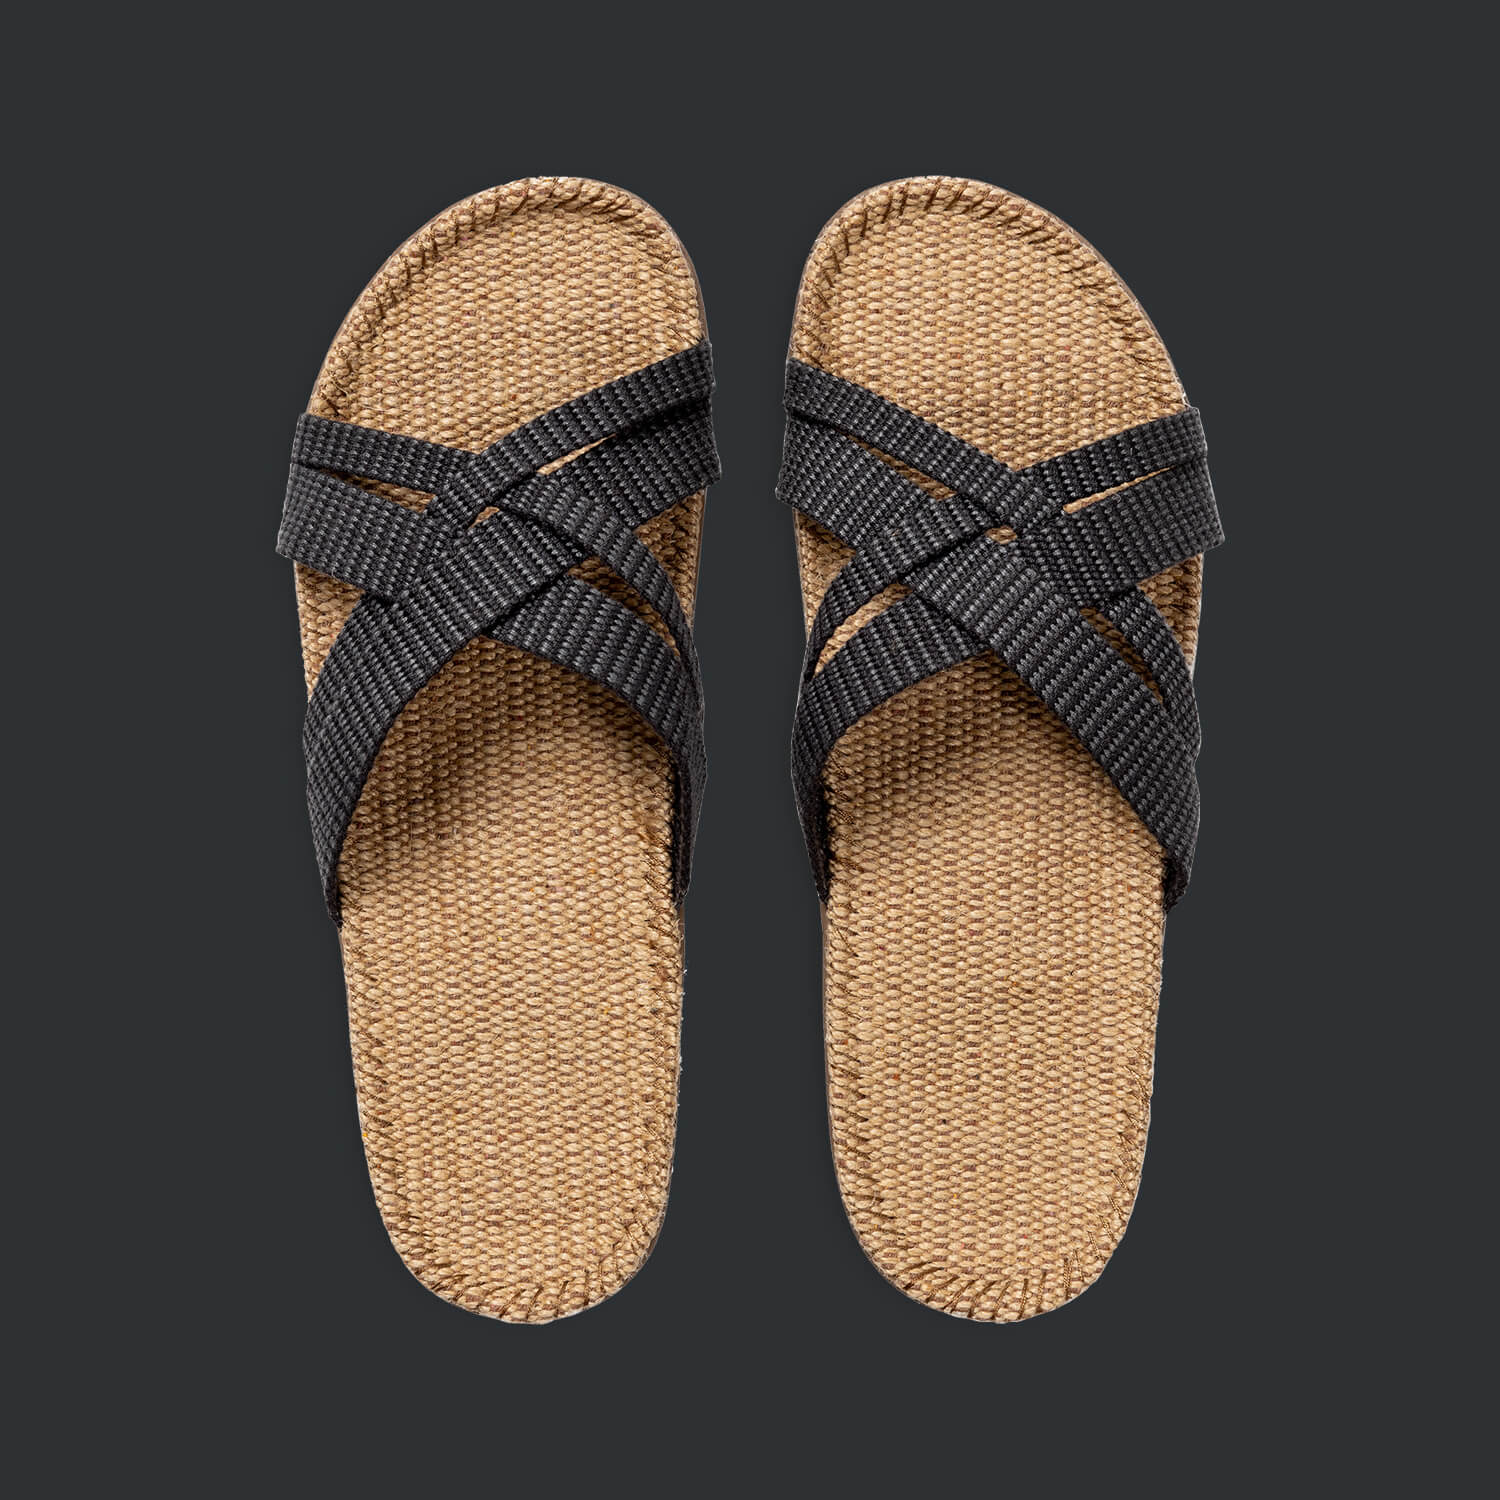 Danish Sandals - Womens #1 | Charcoal | Light Breathable Washable | by Shangies - Lifestory - Shangies by Stilov